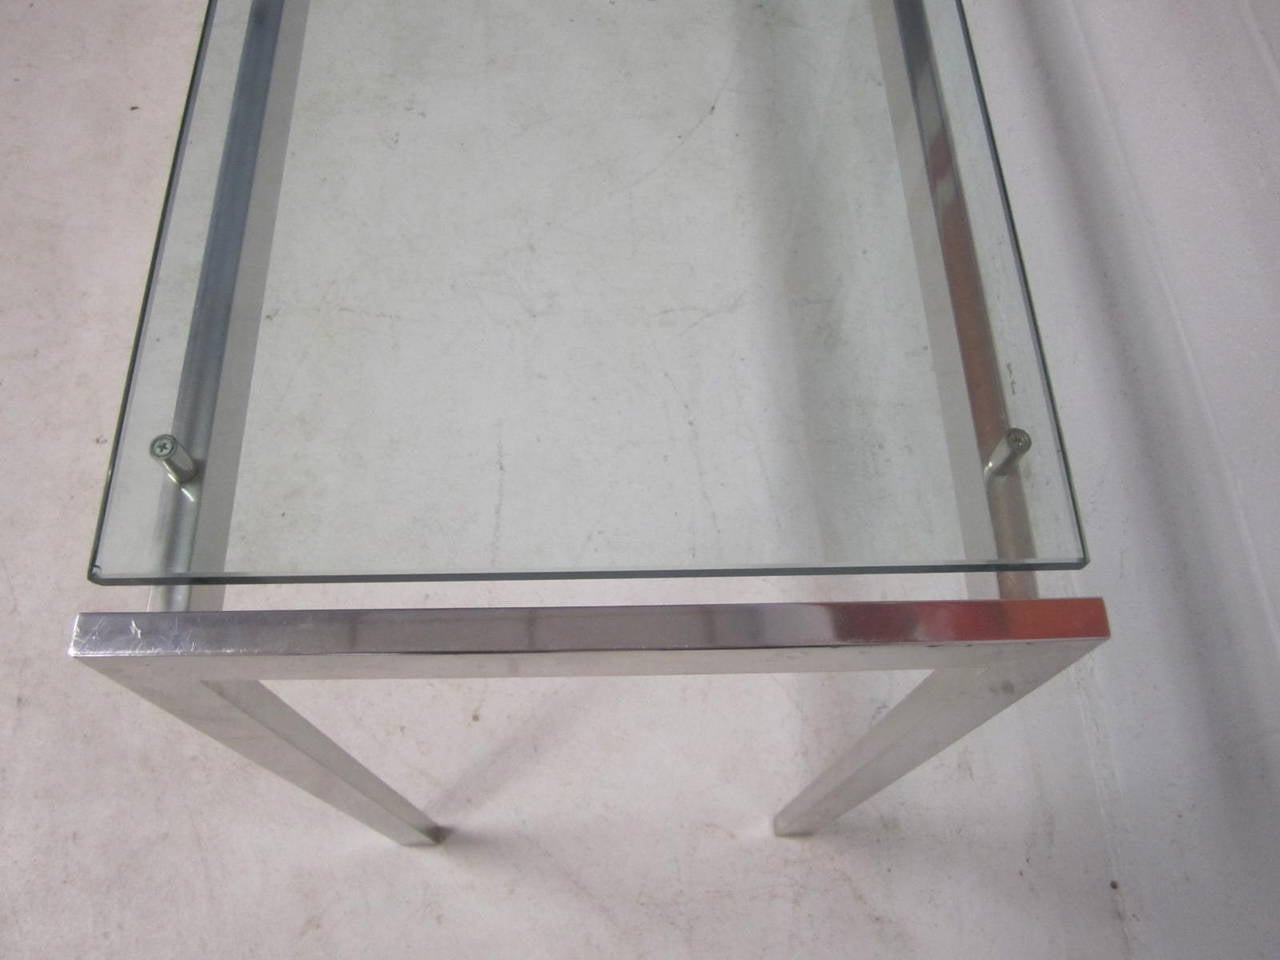 1970s Polished Aluminum Long, Mid-Century Modern Console Table In Good Condition For Sale In Pemberton, NJ